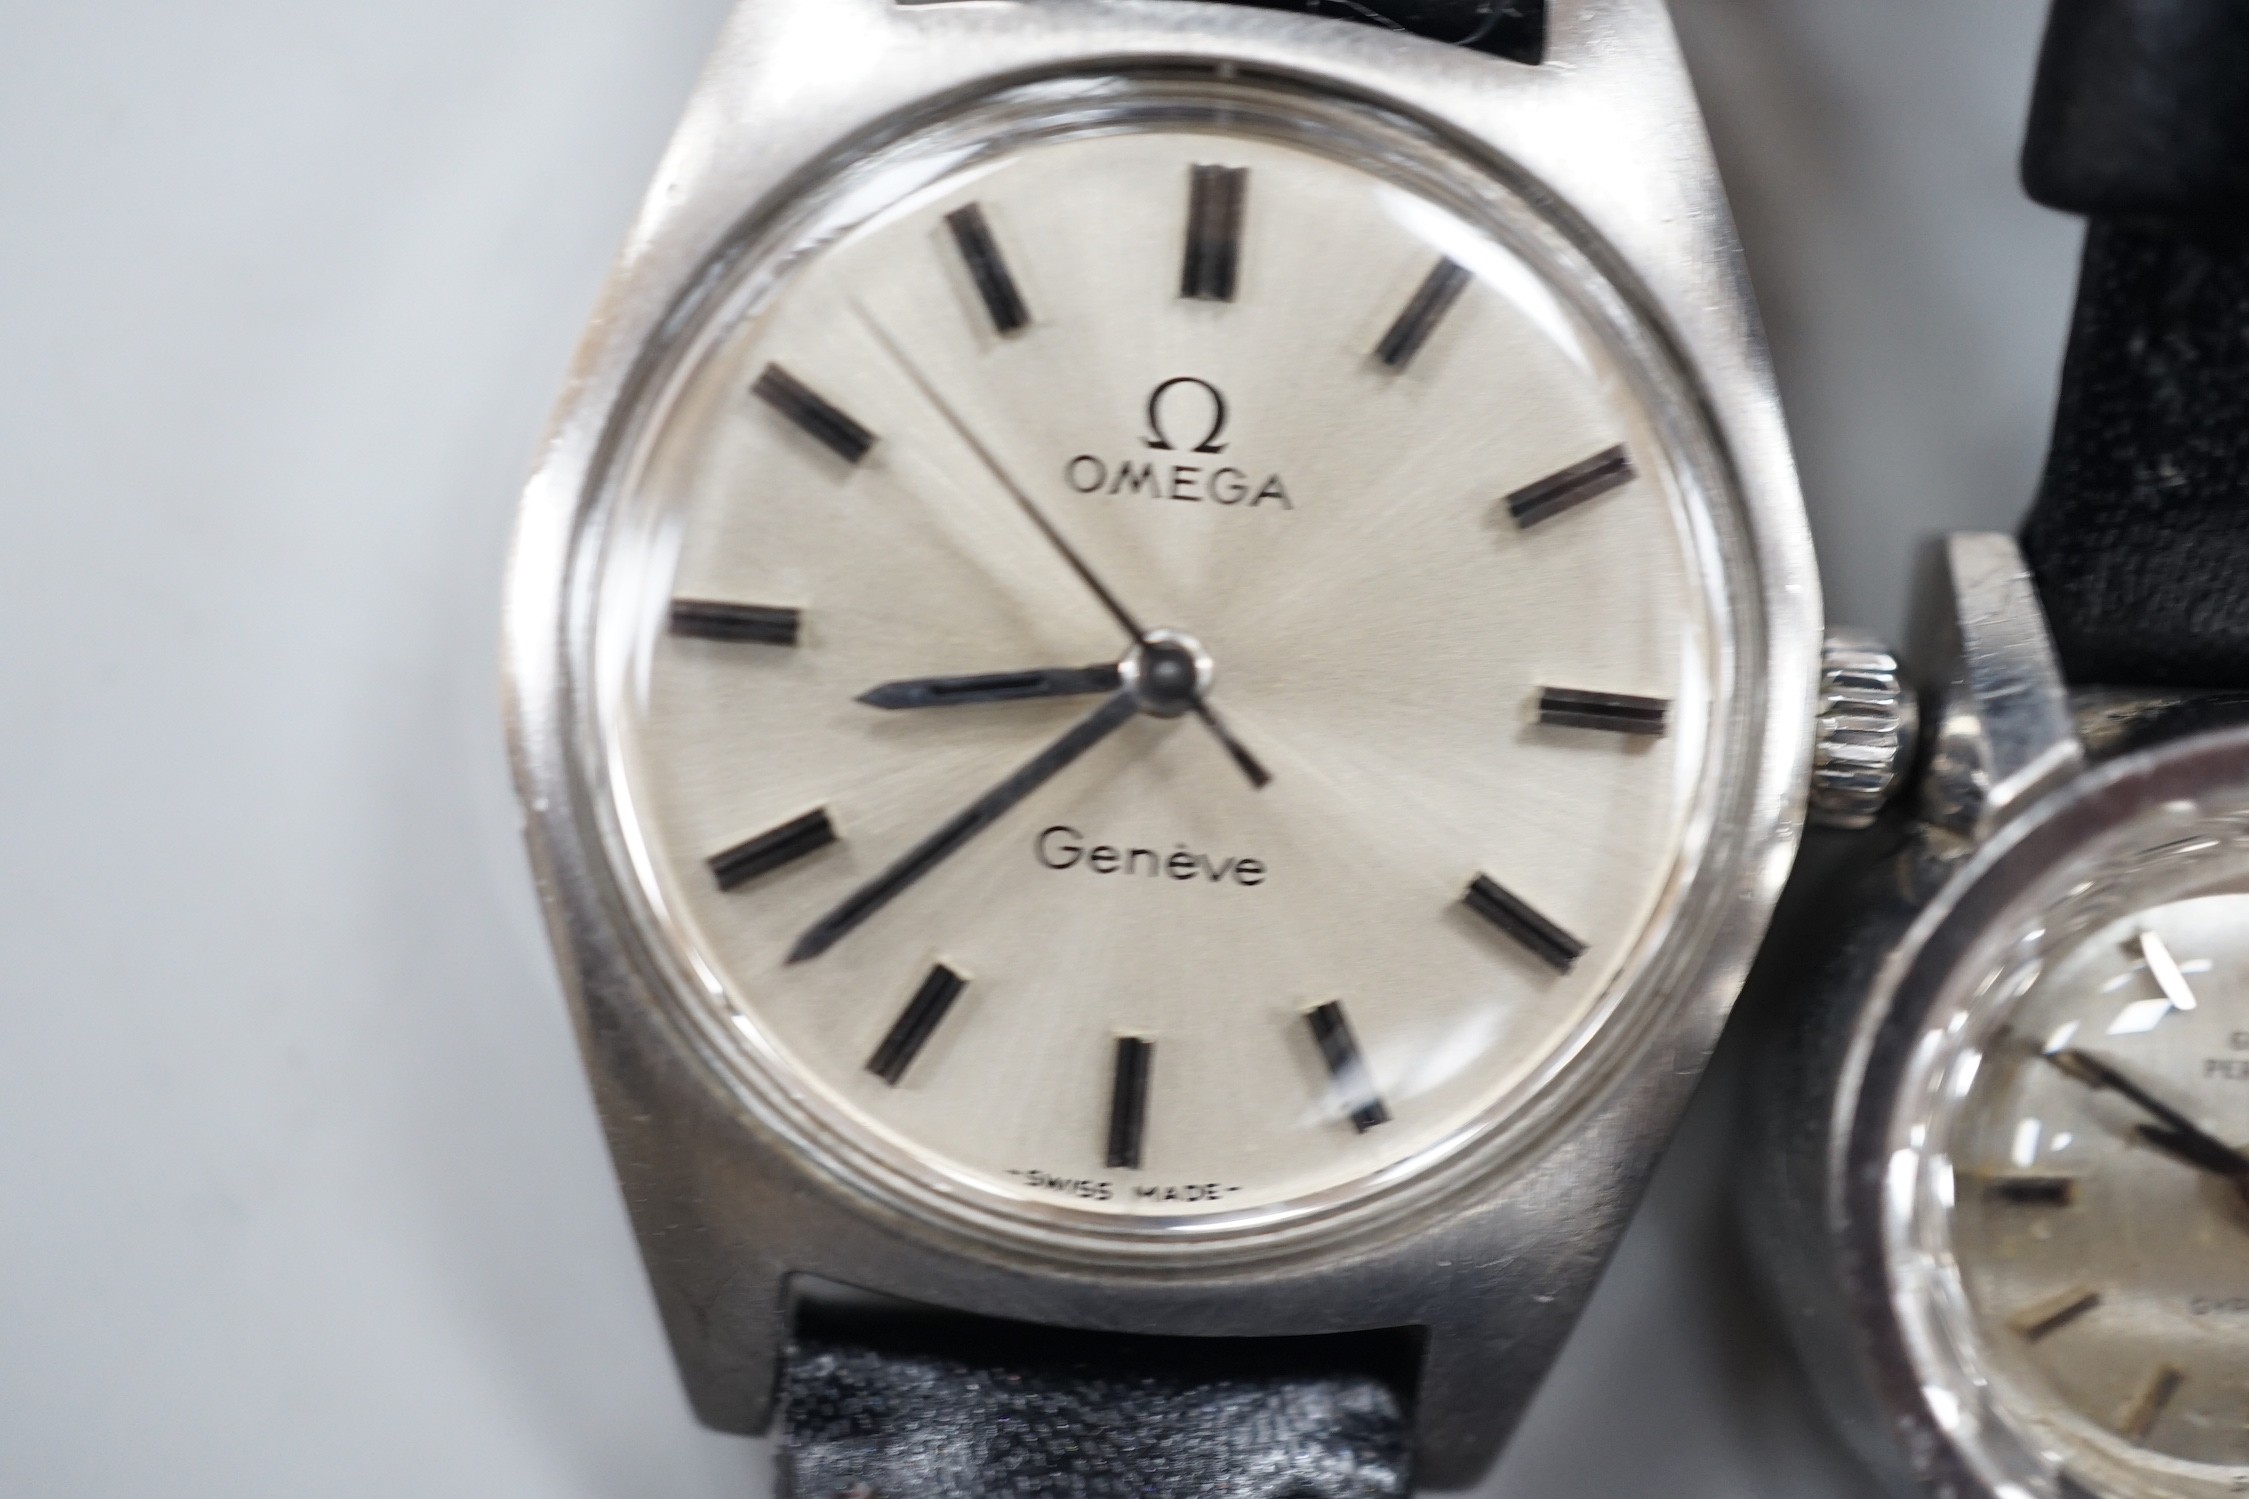 A lady's stainless steel Omega manual wind wrist watch, with baton numerals, together with a lady's stainless steel Zenith square dial manual wind wrist watch and a similar Girard Perregaux manual wind wrist watch.